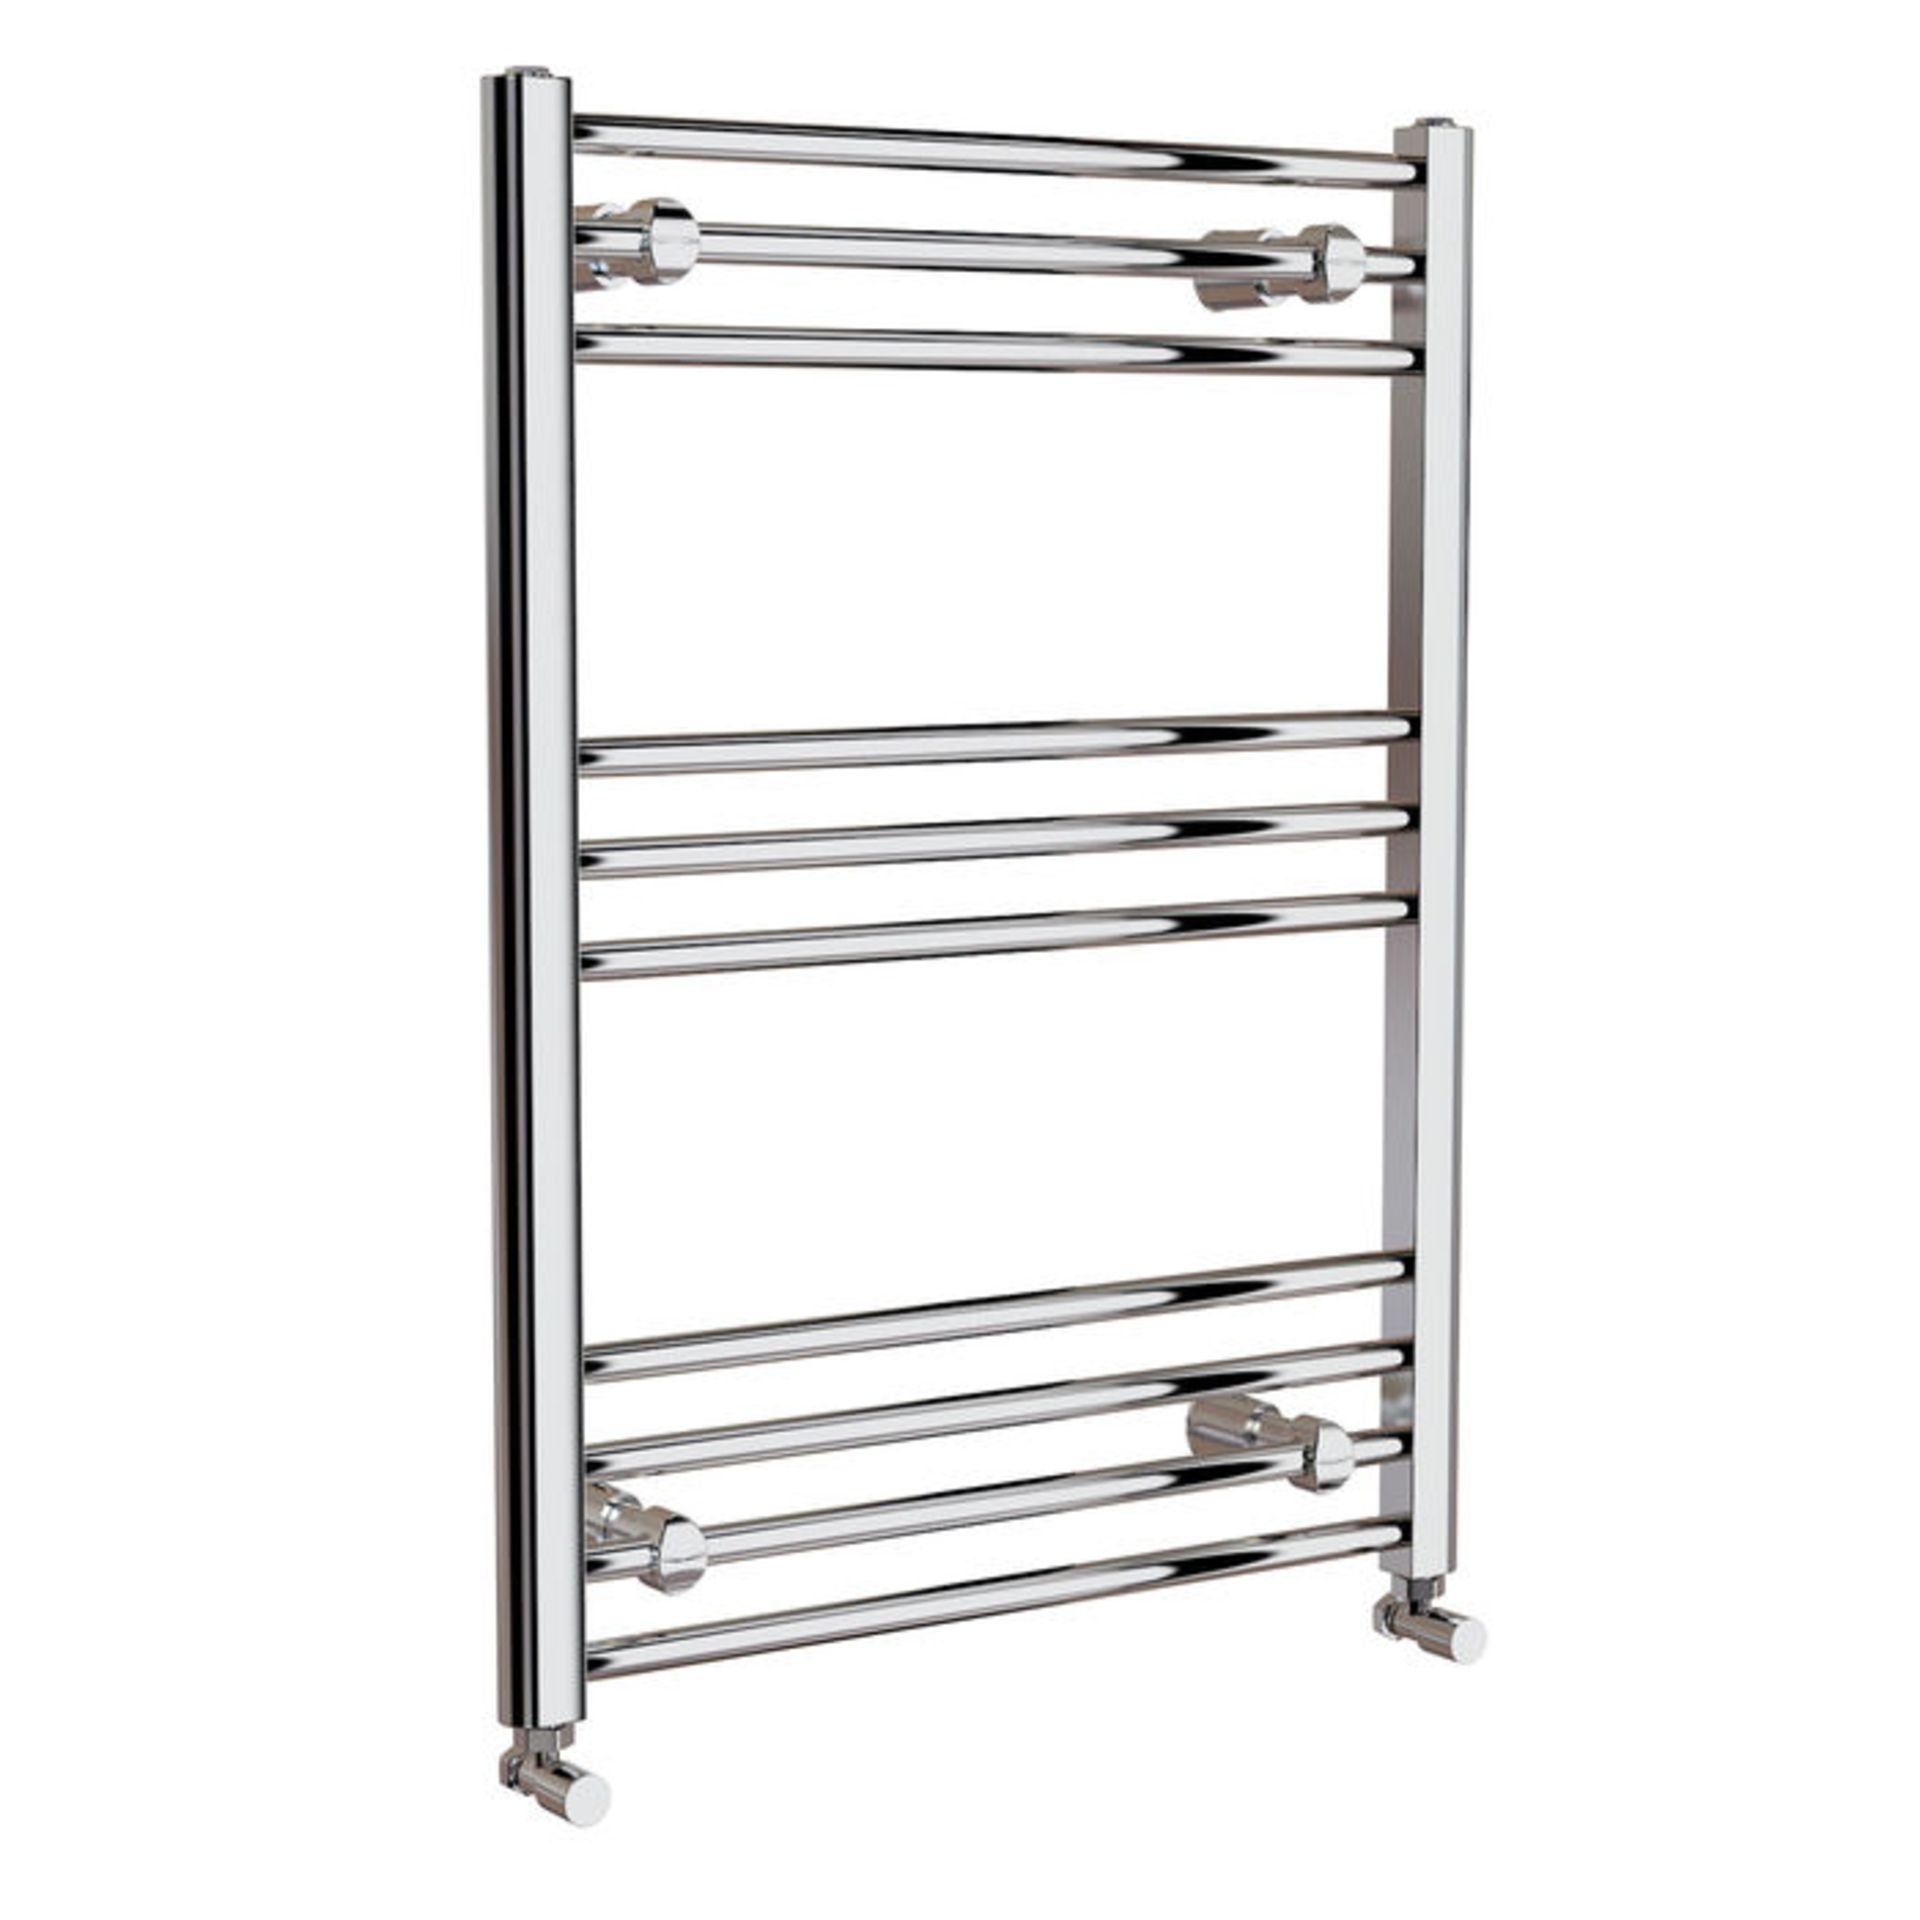 (XM80) 800x600mm - 20mm Tubes - Chrome Heated Straight Rail Ladder Towel Radiator. Low carbon - Image 3 of 4